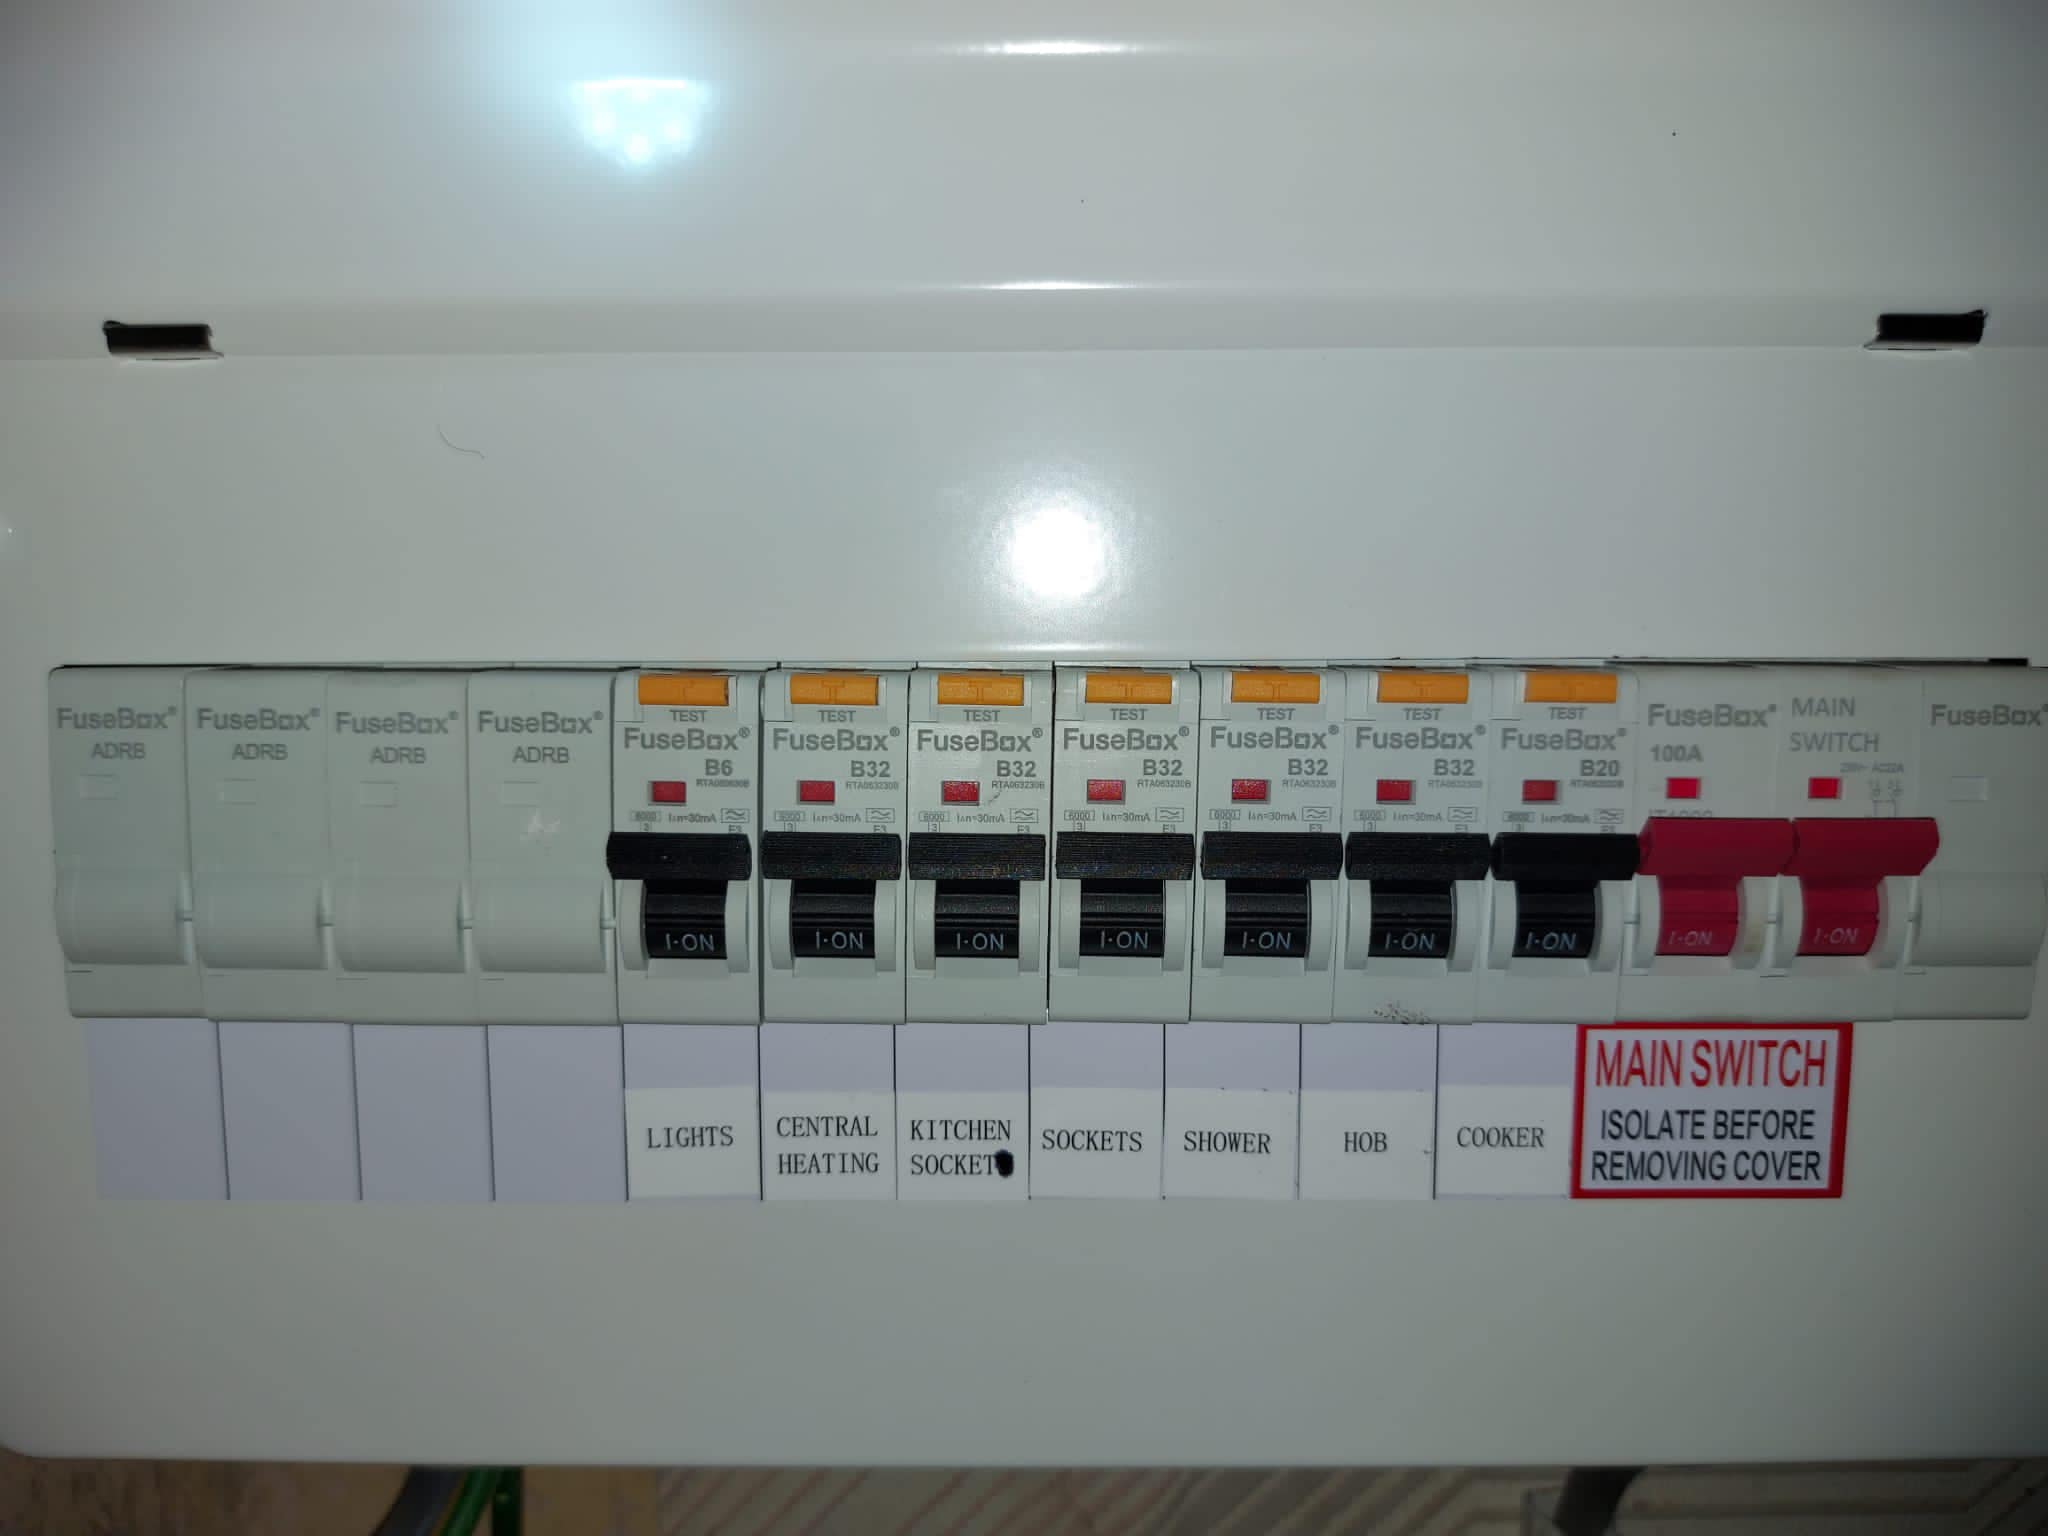 A picture of a fuse box